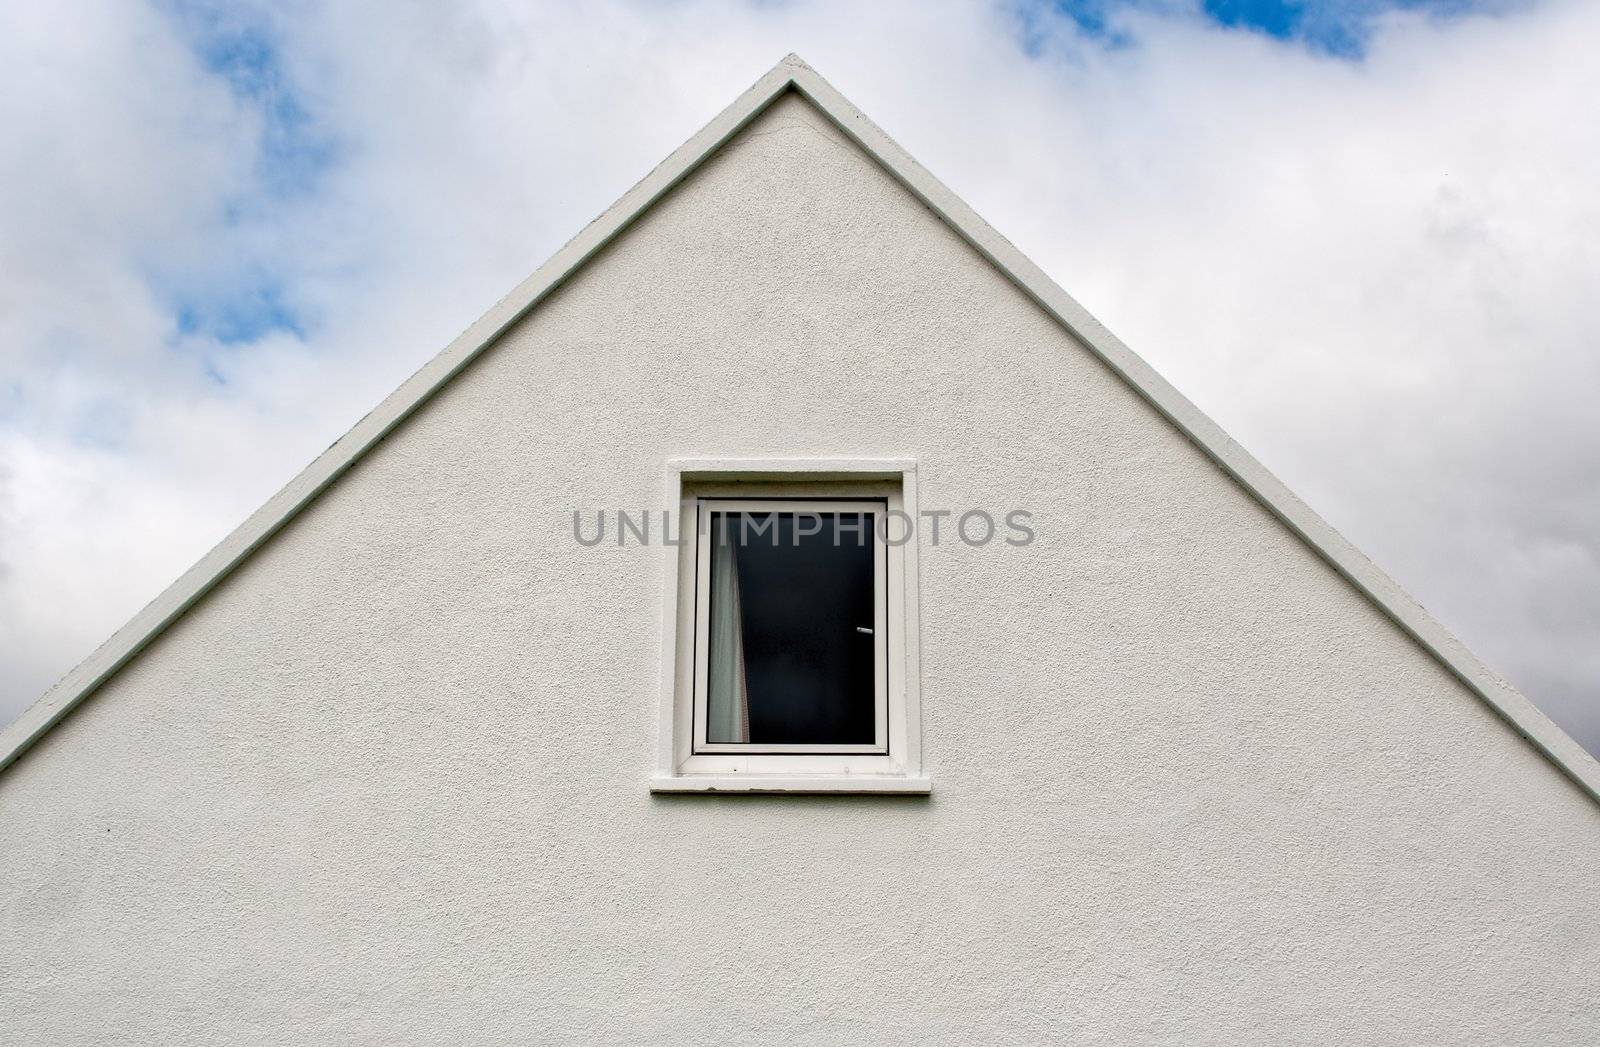 An abstract image of the top of a house. The house forms a triangle against a cloudy sky.